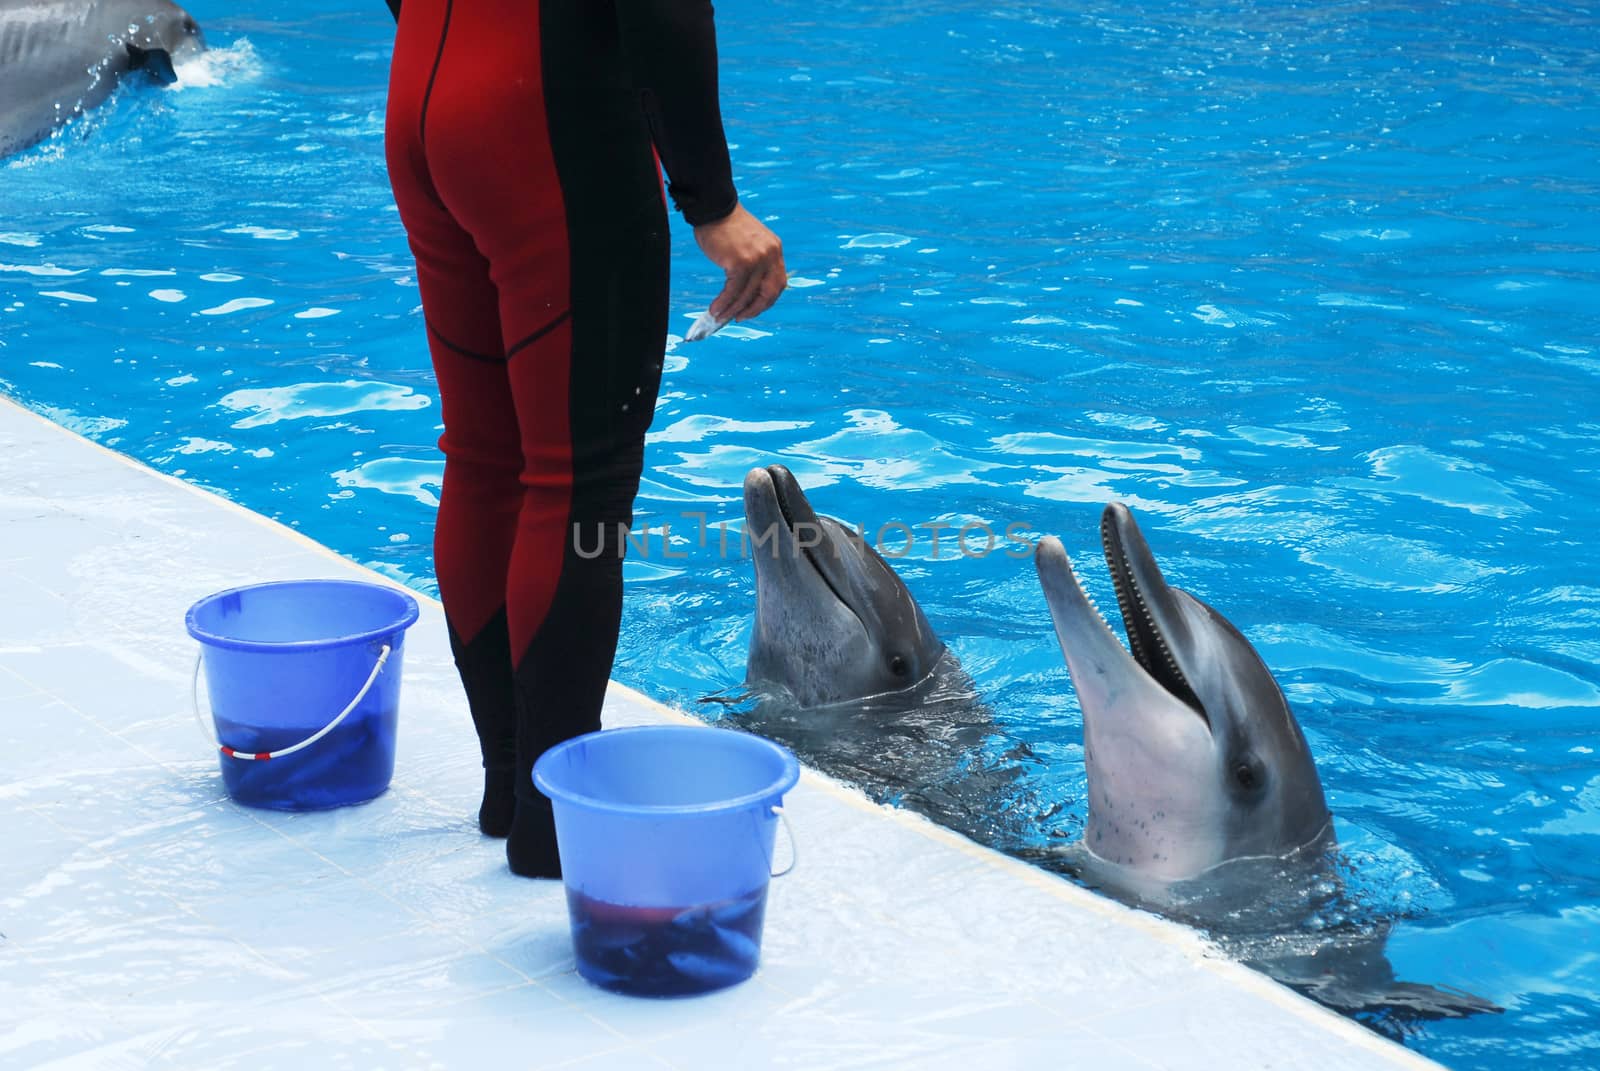 trainer feeding dolphins by think4photop